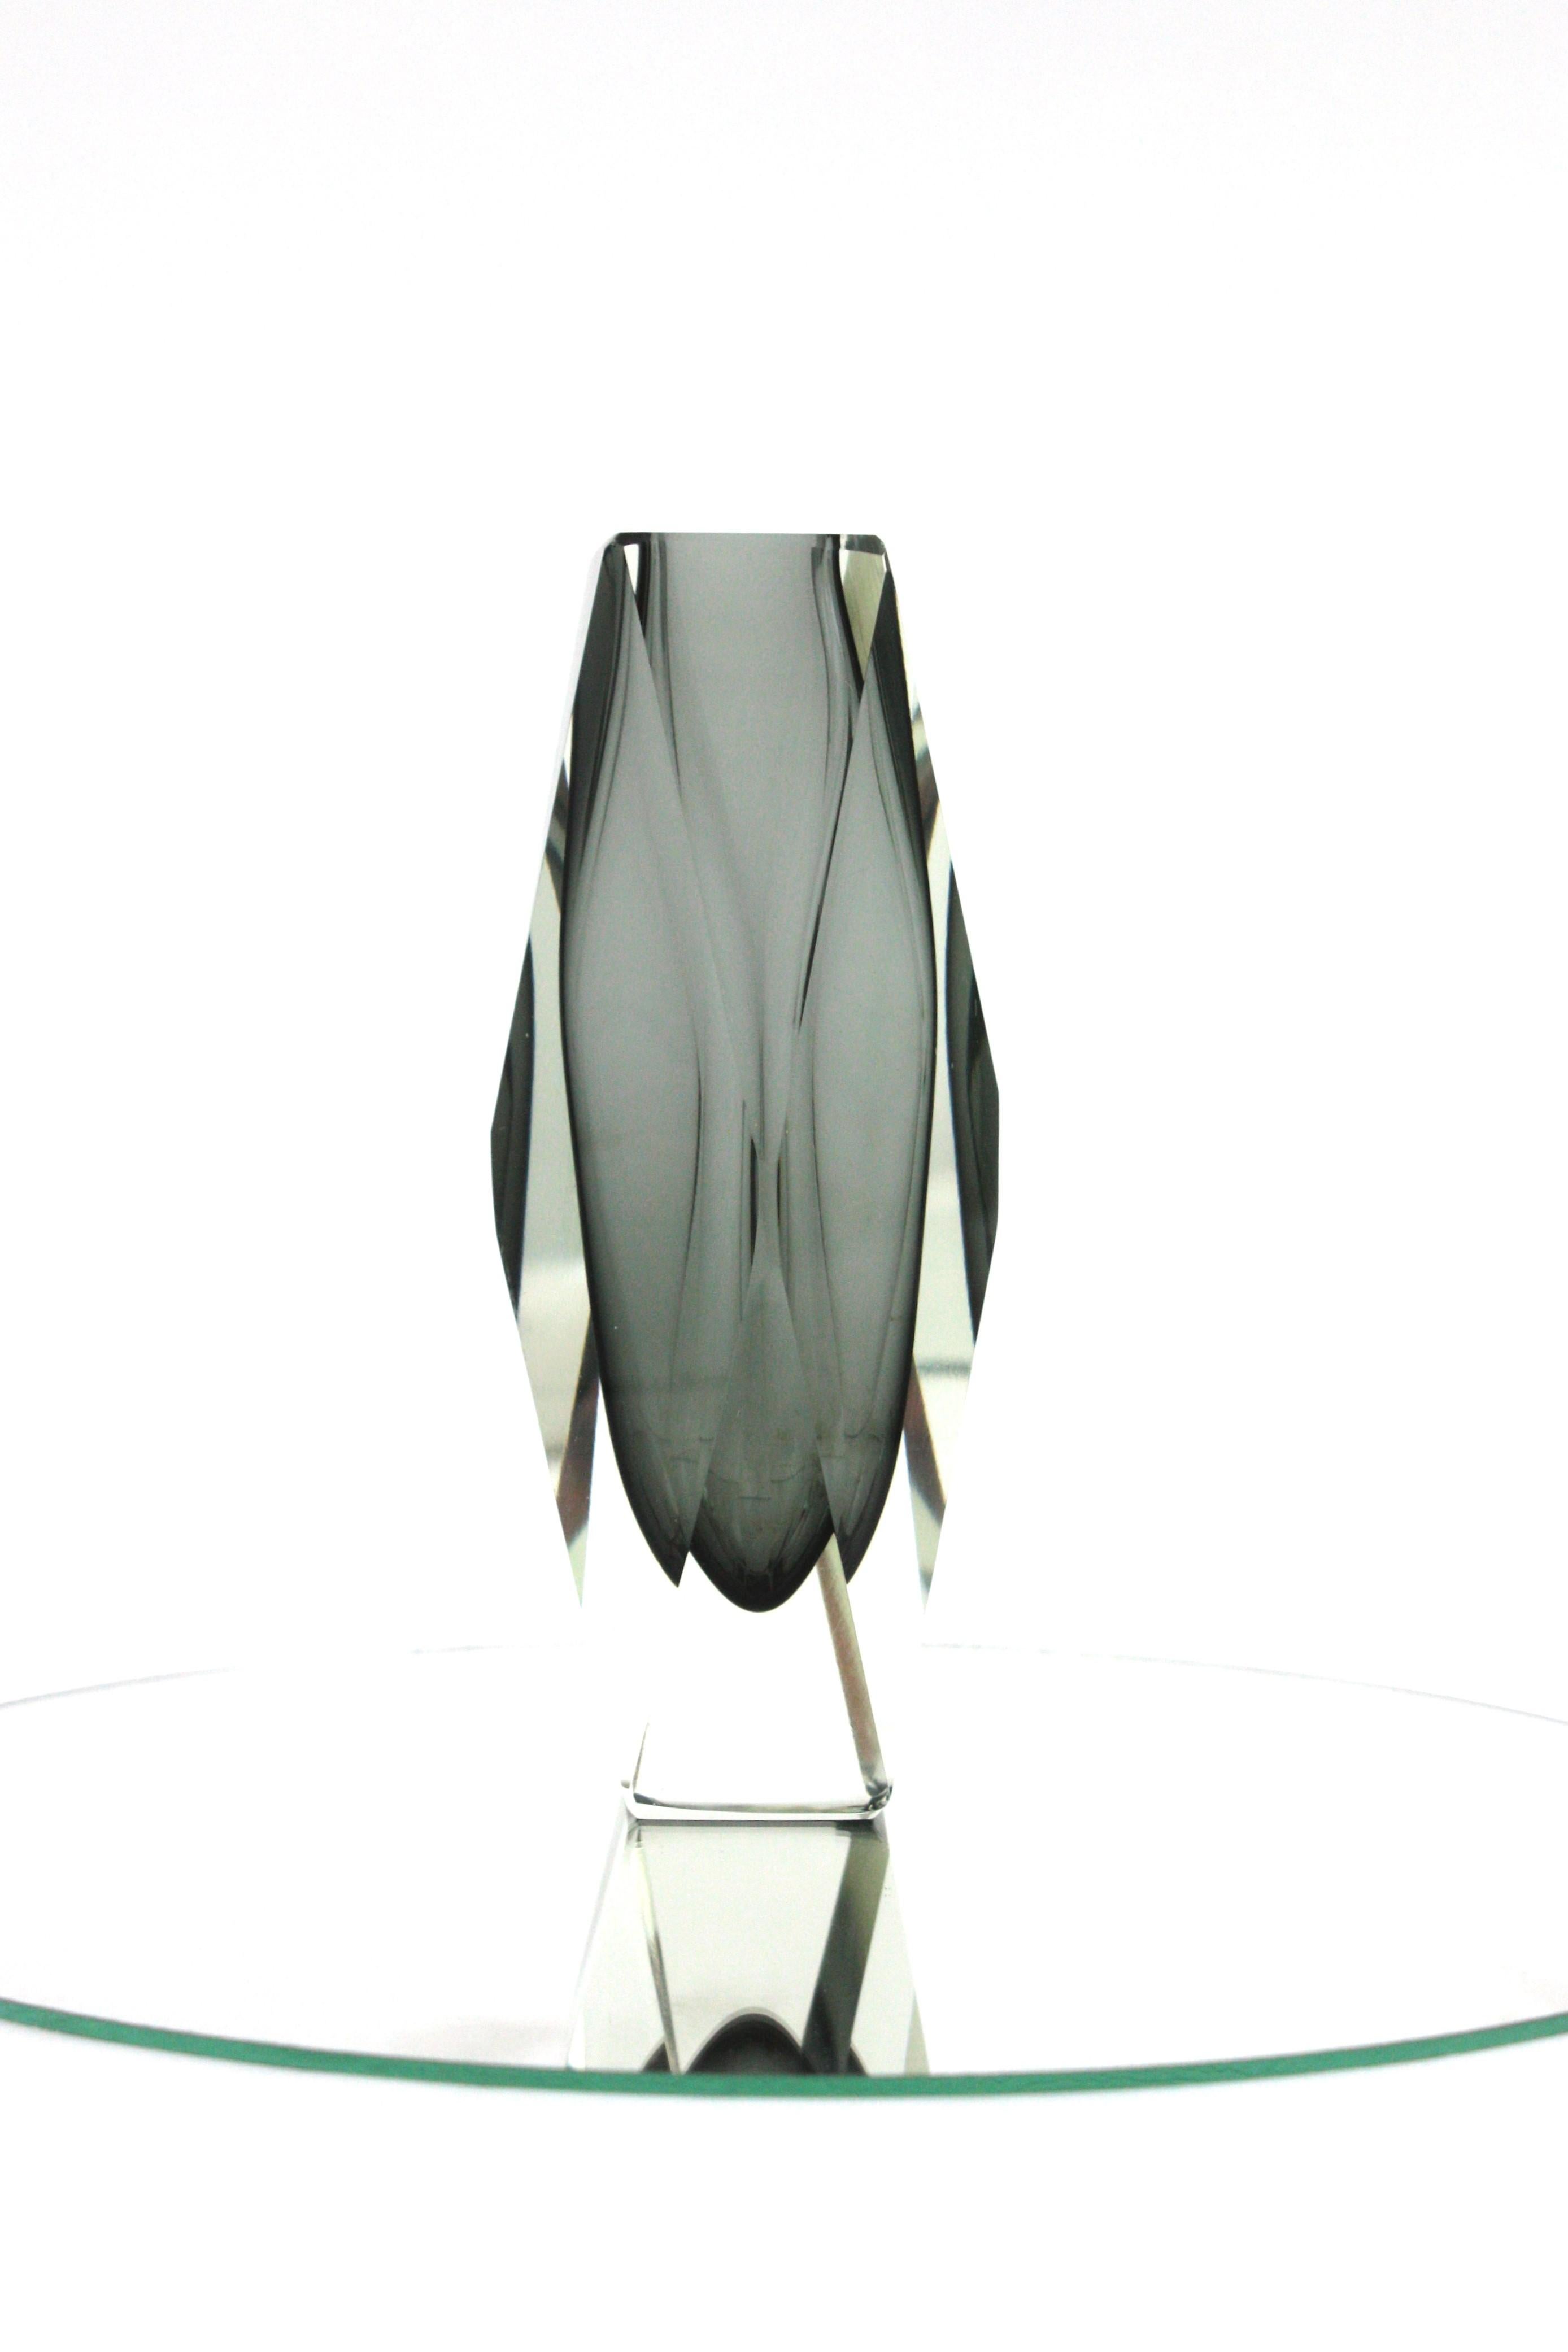 Mandruzzato Murano Sommerso Smoked Grey Clear Faceted Art Glass Vase For Sale 2